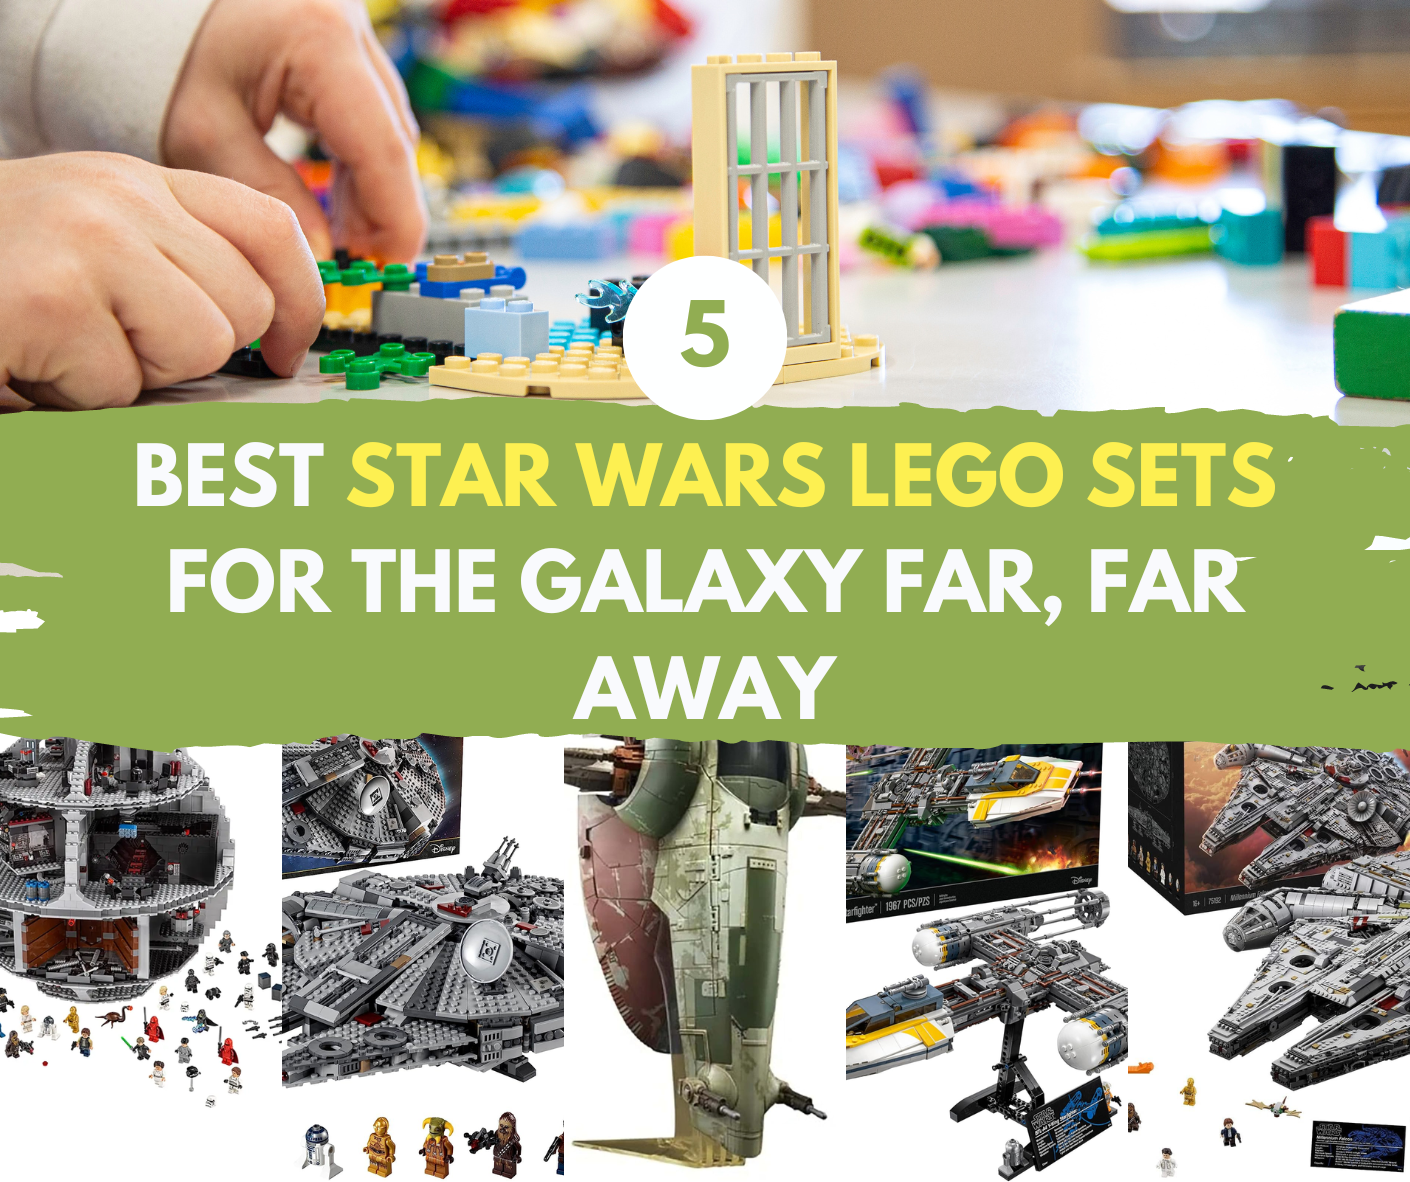 5 Best Star Wars LEGO Sets That Ignite Our Passion for the Galaxy Far, Far Away